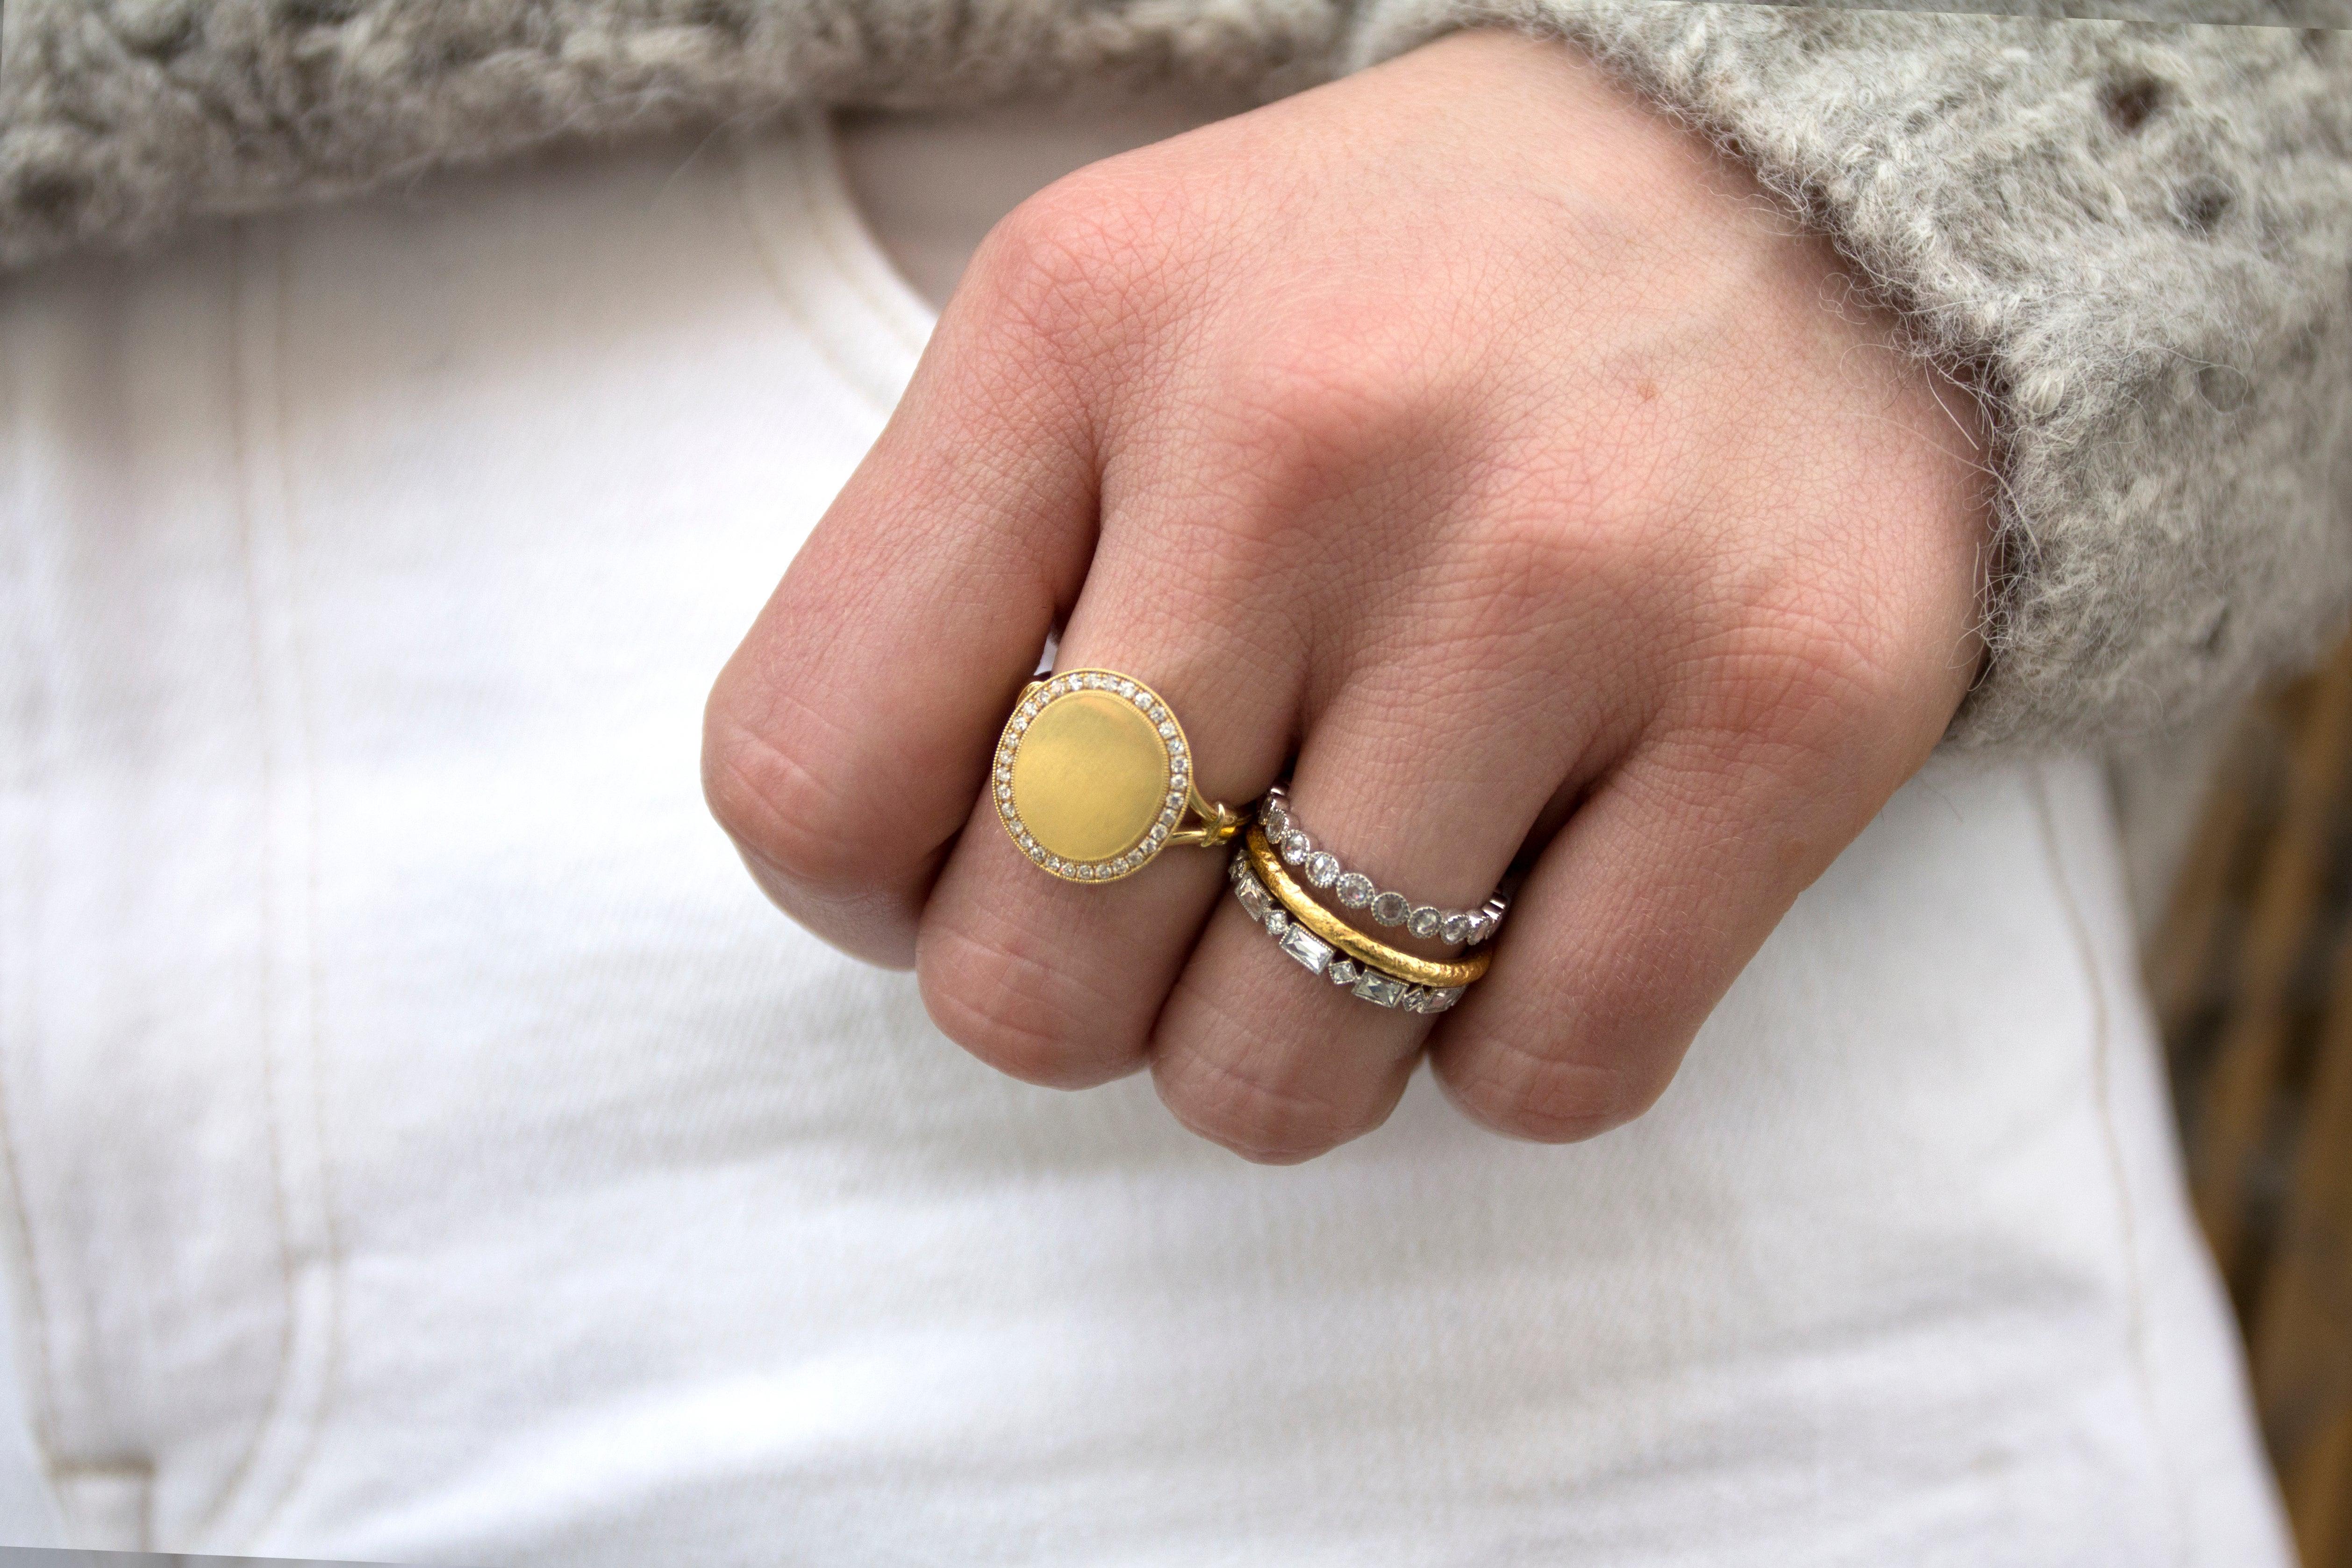 For Sale:  Handcrafted Paxton Diamond Frame Signet Ring in 18K Yellow Gold by Single Stone 5